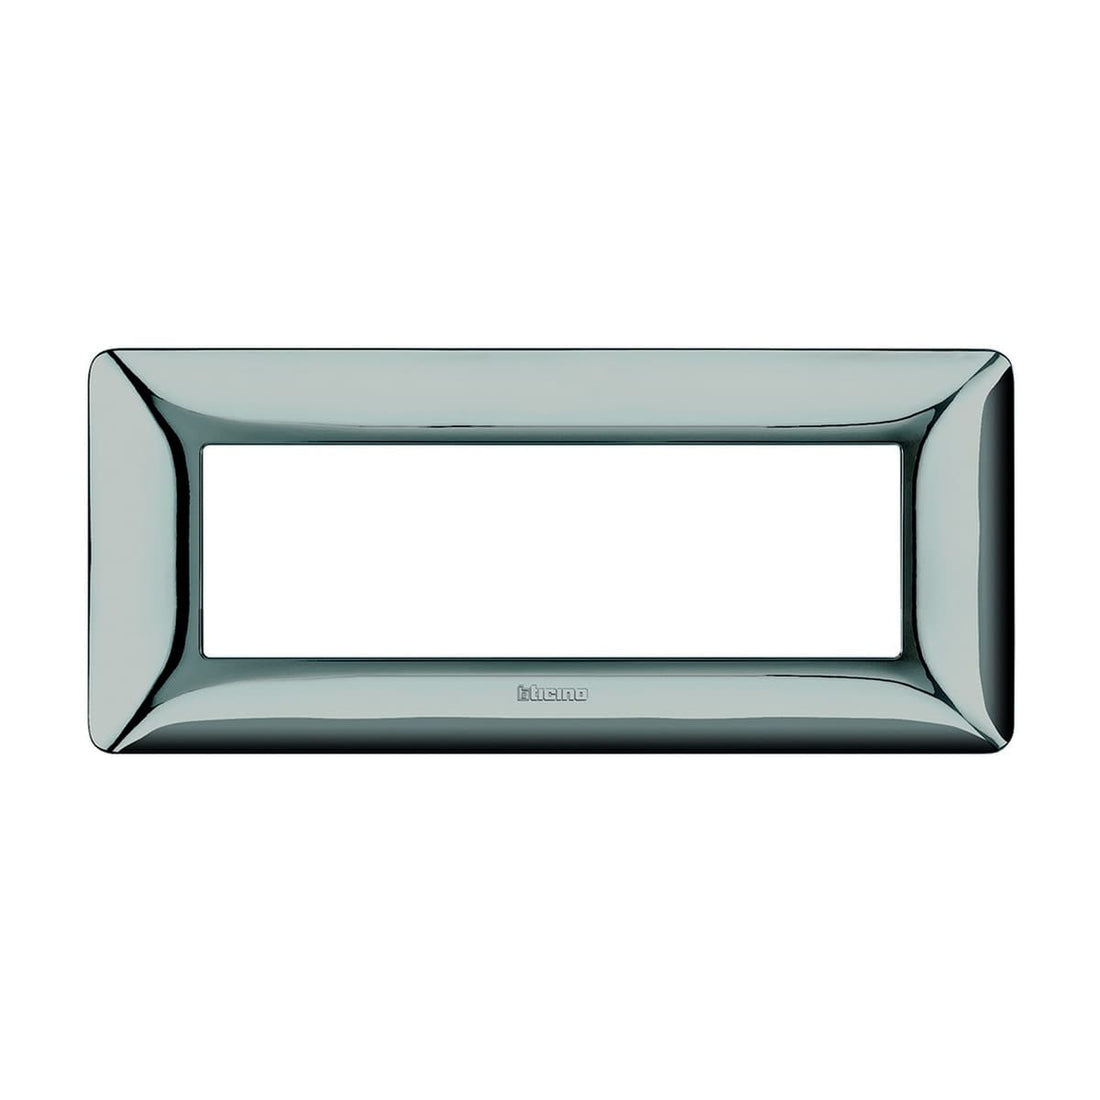 MATIX PLATE 6 PLACES POLISHED CHROME - best price from Maltashopper.com BR420100859